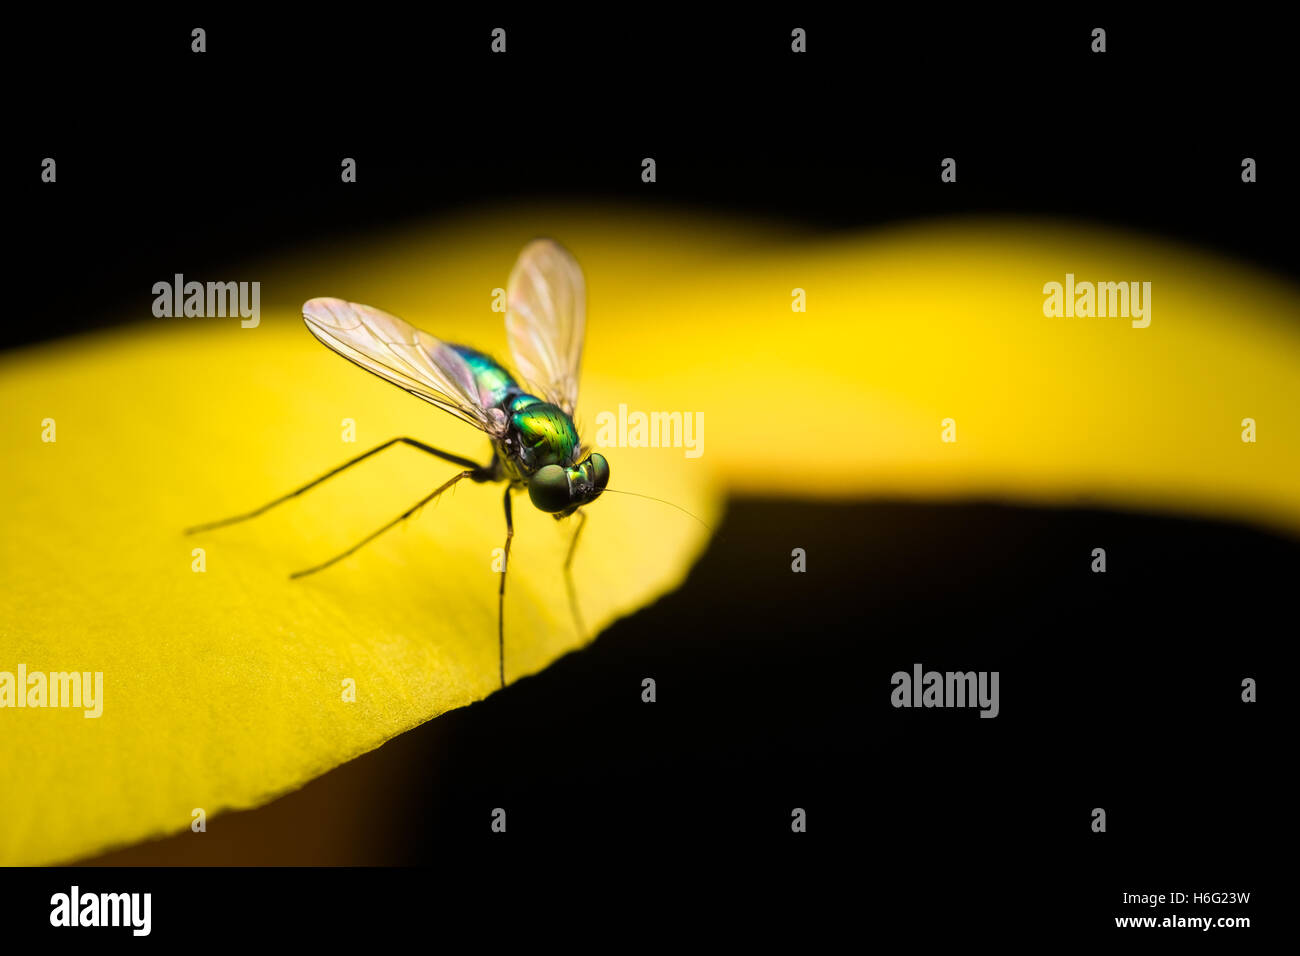 Green long legged fly resting on a yellow flower pedal Stock Photo